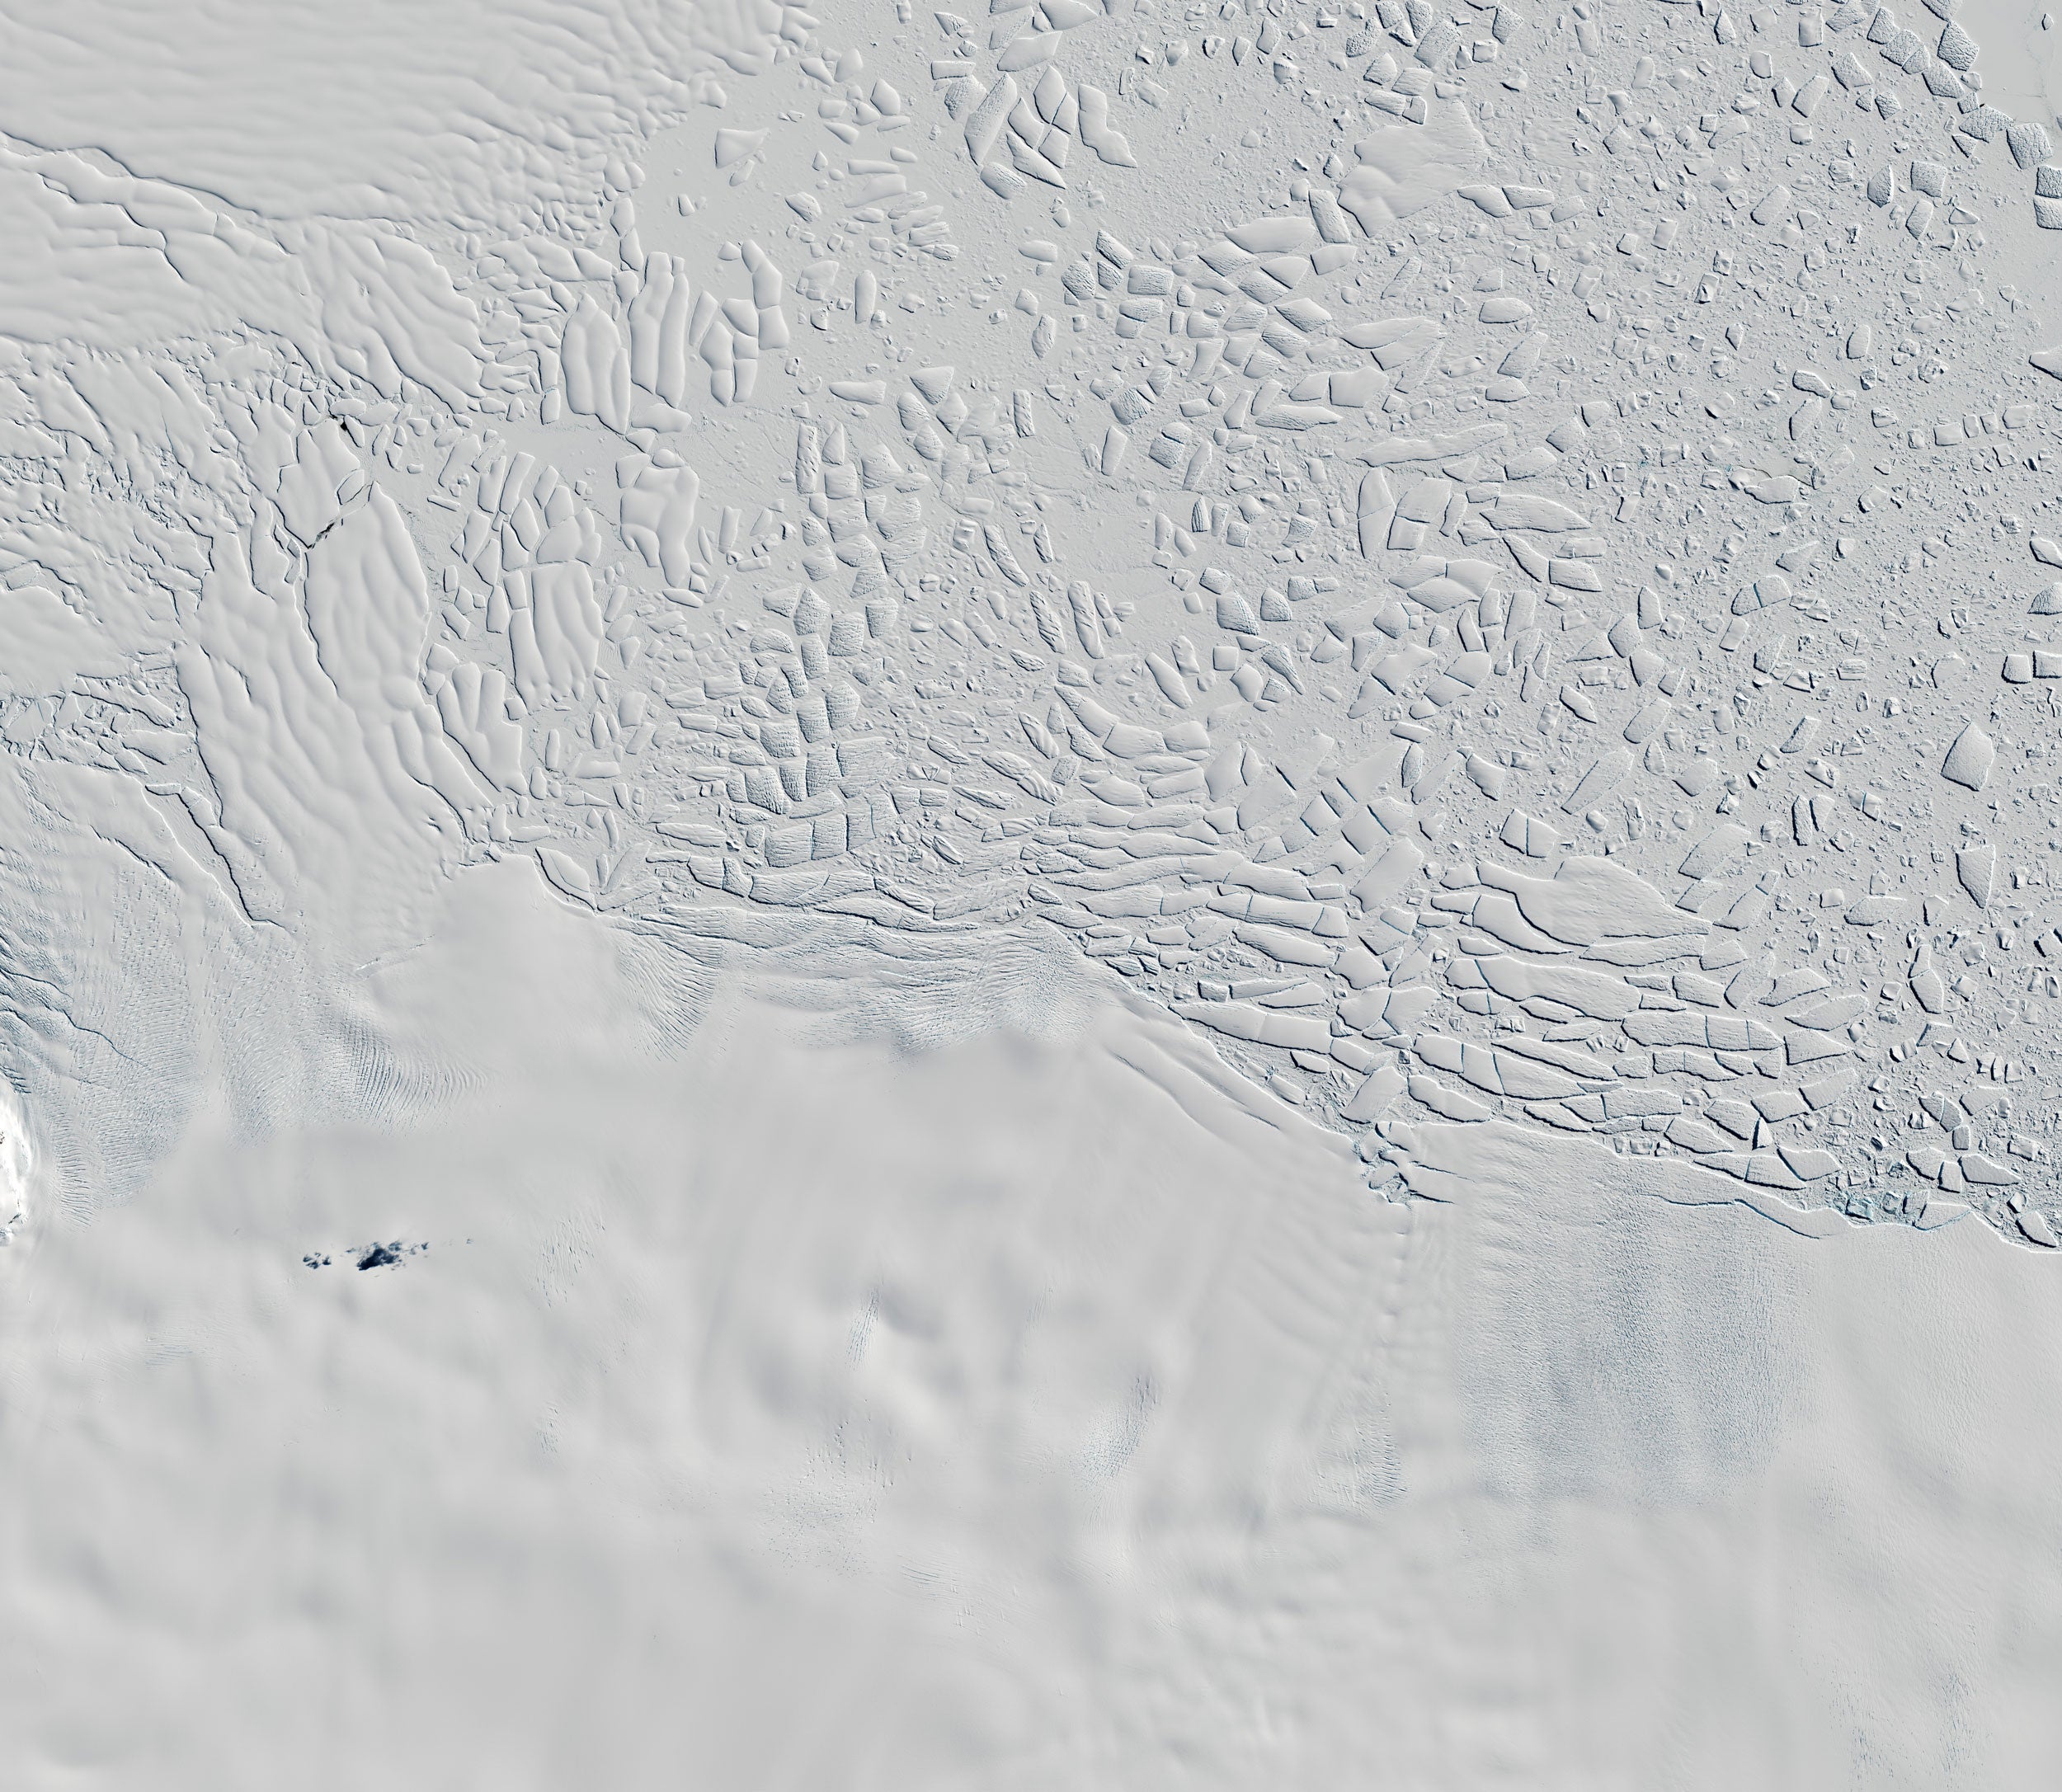 We’re finally getting close-up, fearsome views of the doomsday glacier